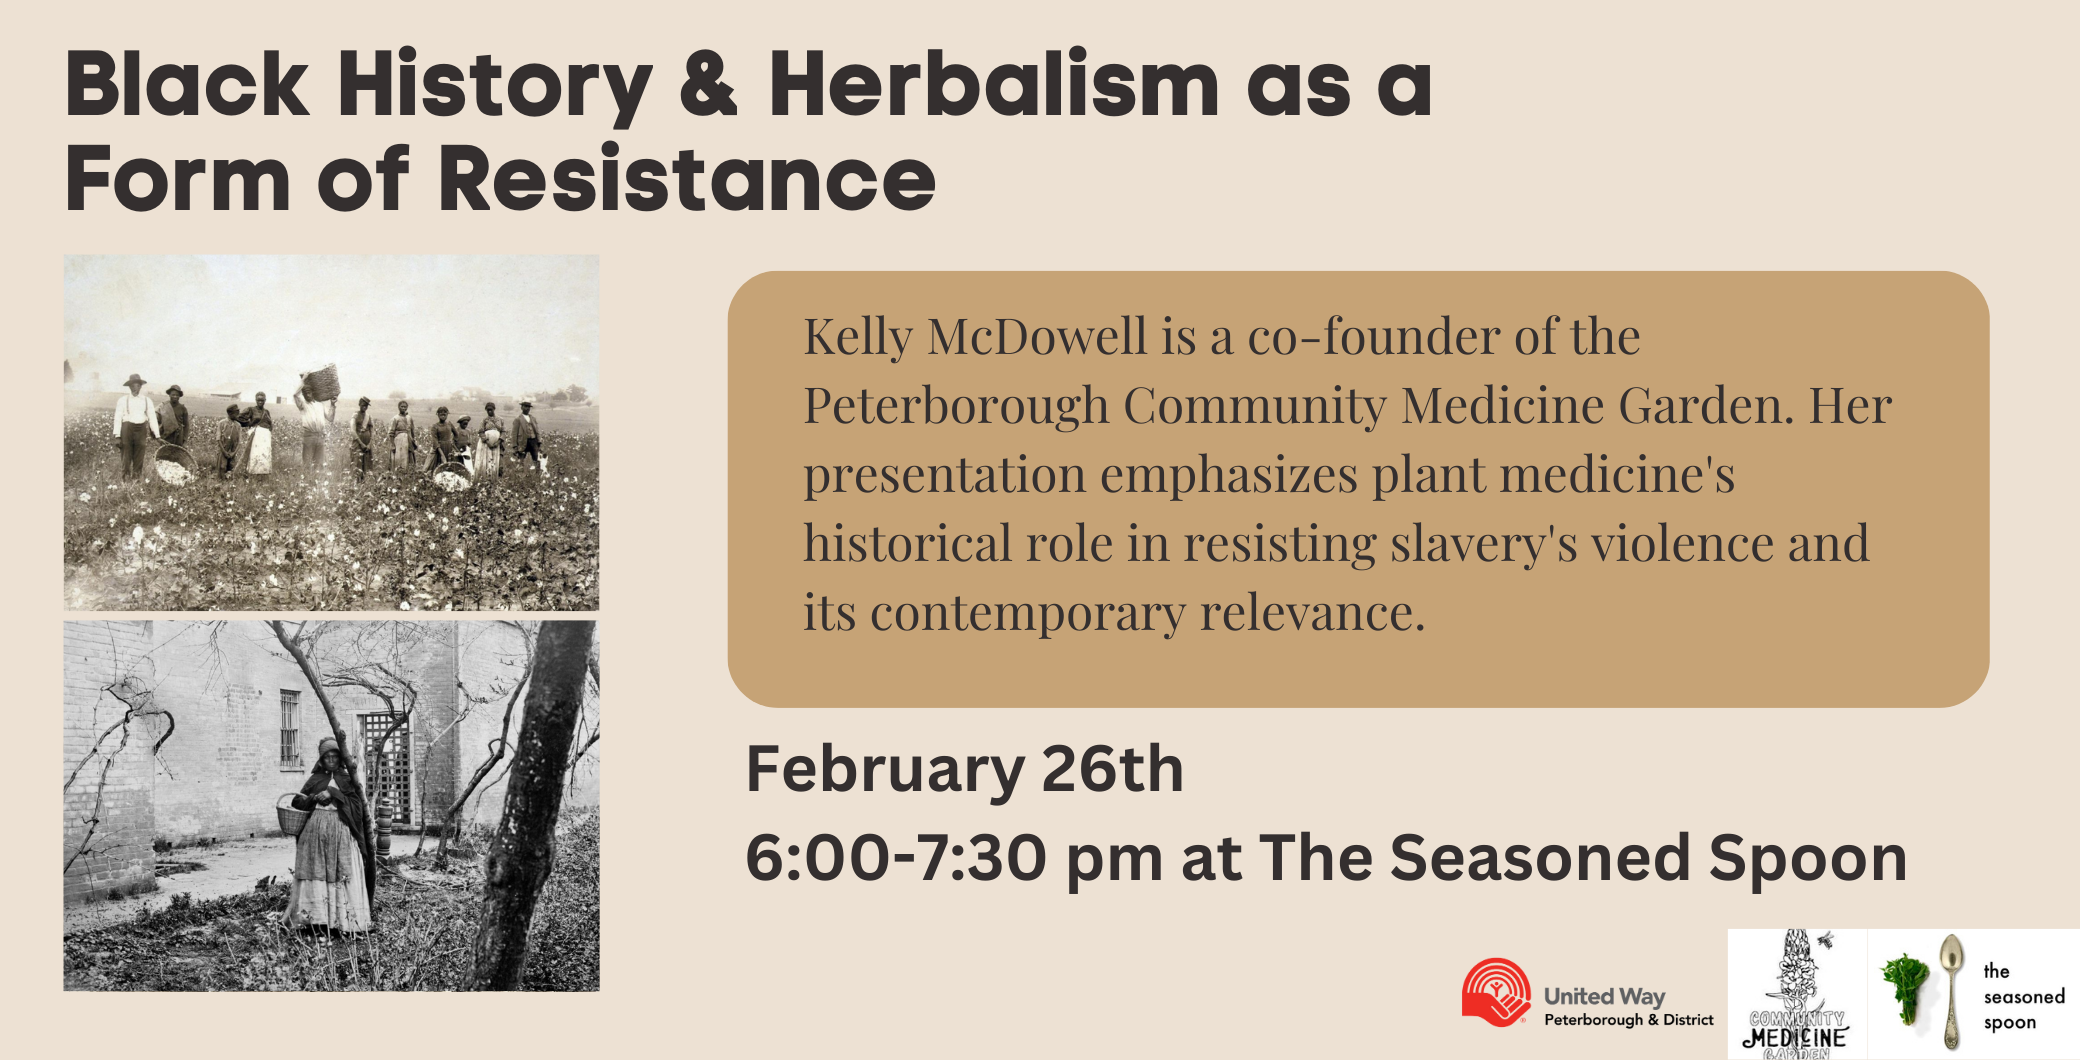 Join Kelly McDowell at the Seasoned Spoon on Monday, Februaruy 26th from 6-7:30pm. Her presentation will explore plant medicine's historical role in resisting slavery's violence and its contemporary relevance.